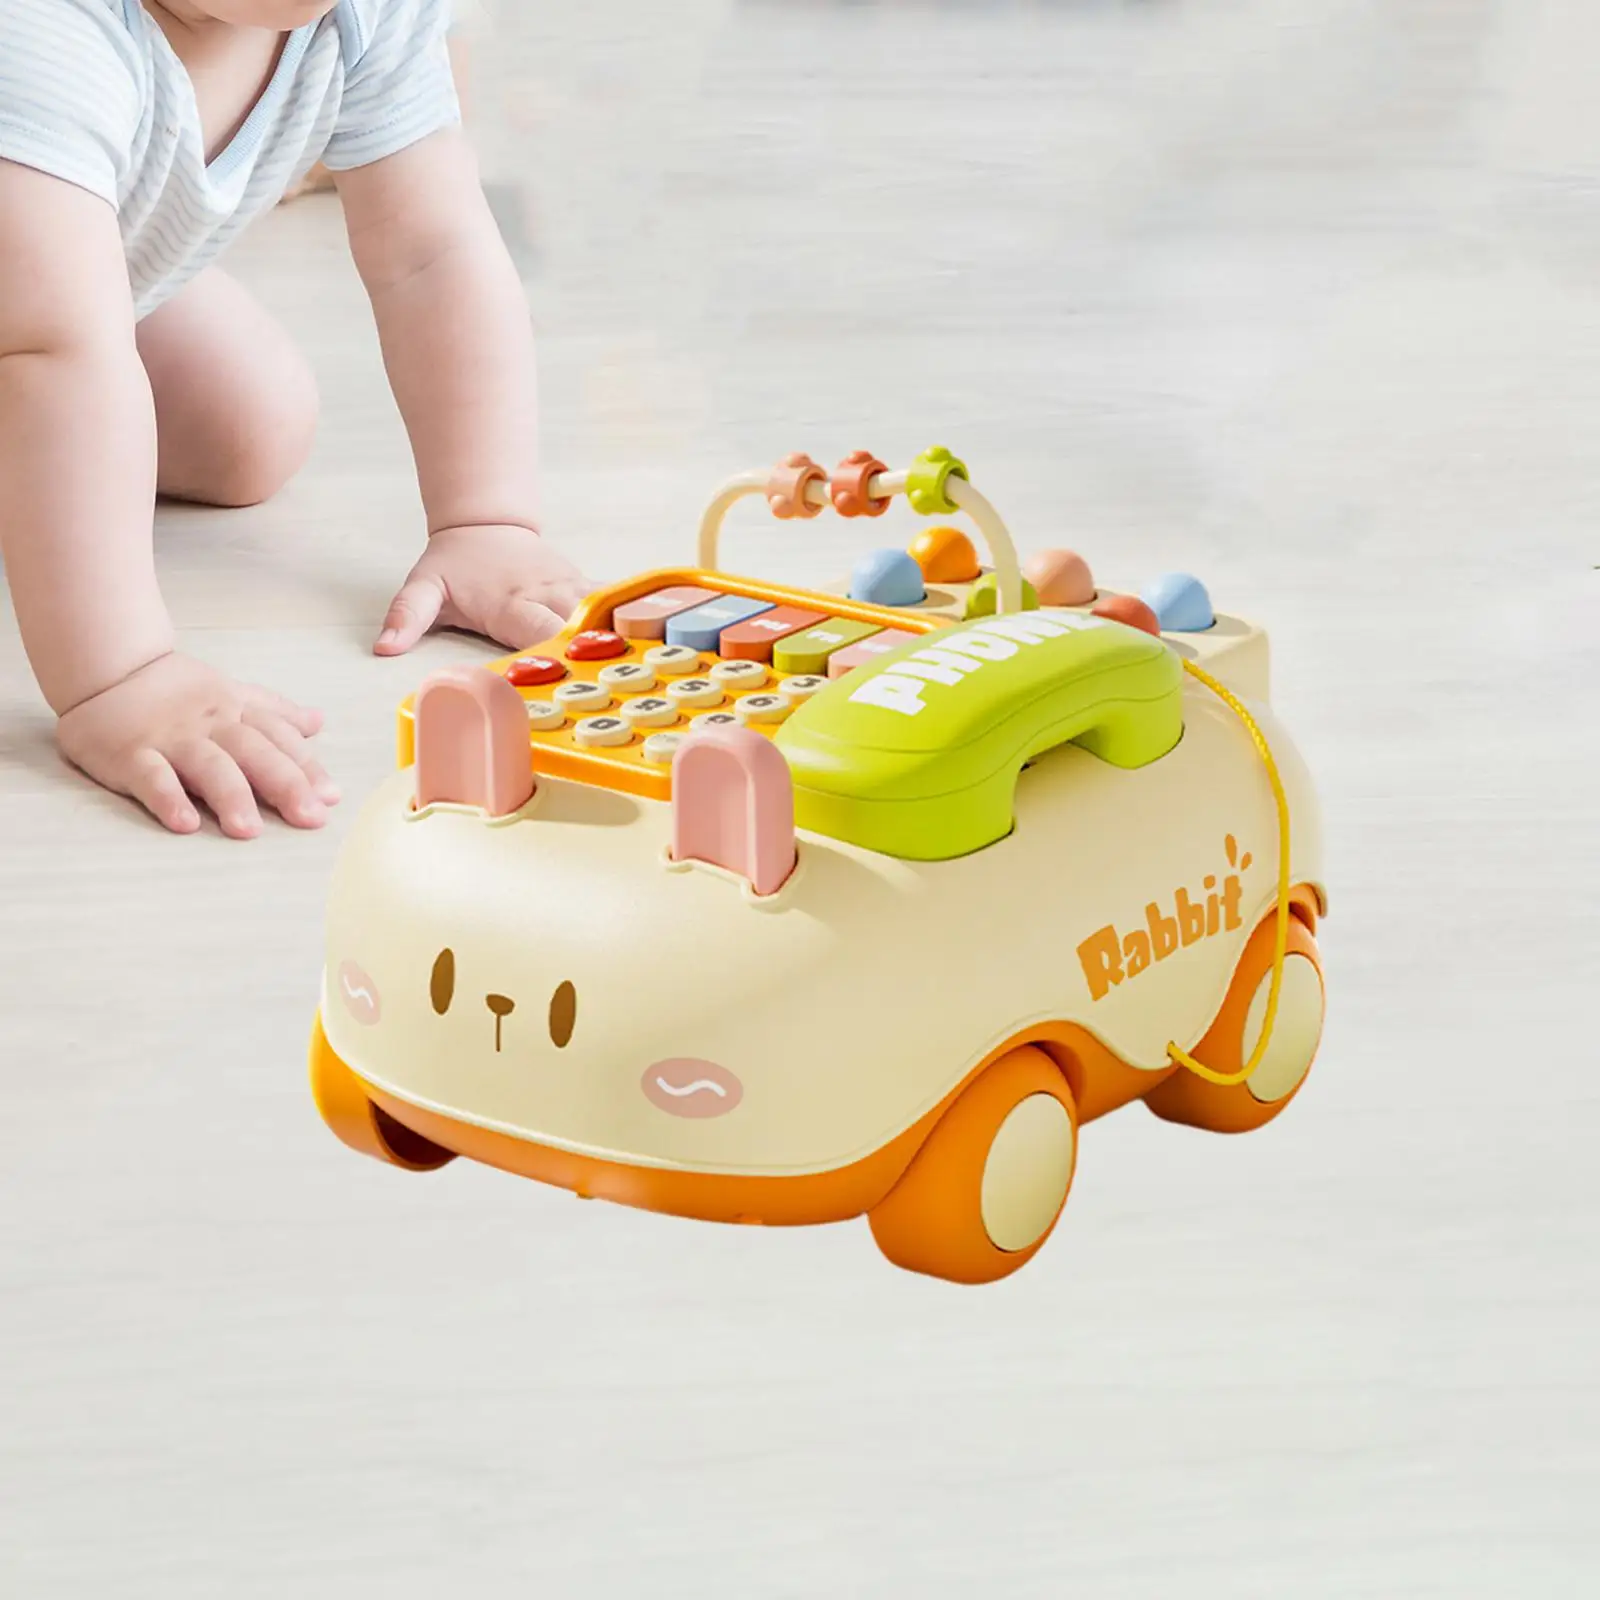 Baby Telephone Toy Educational Toy Multifunction Creative Simulation Telephone Pretend Phone for Toddler Kids Boys Birthday Gift